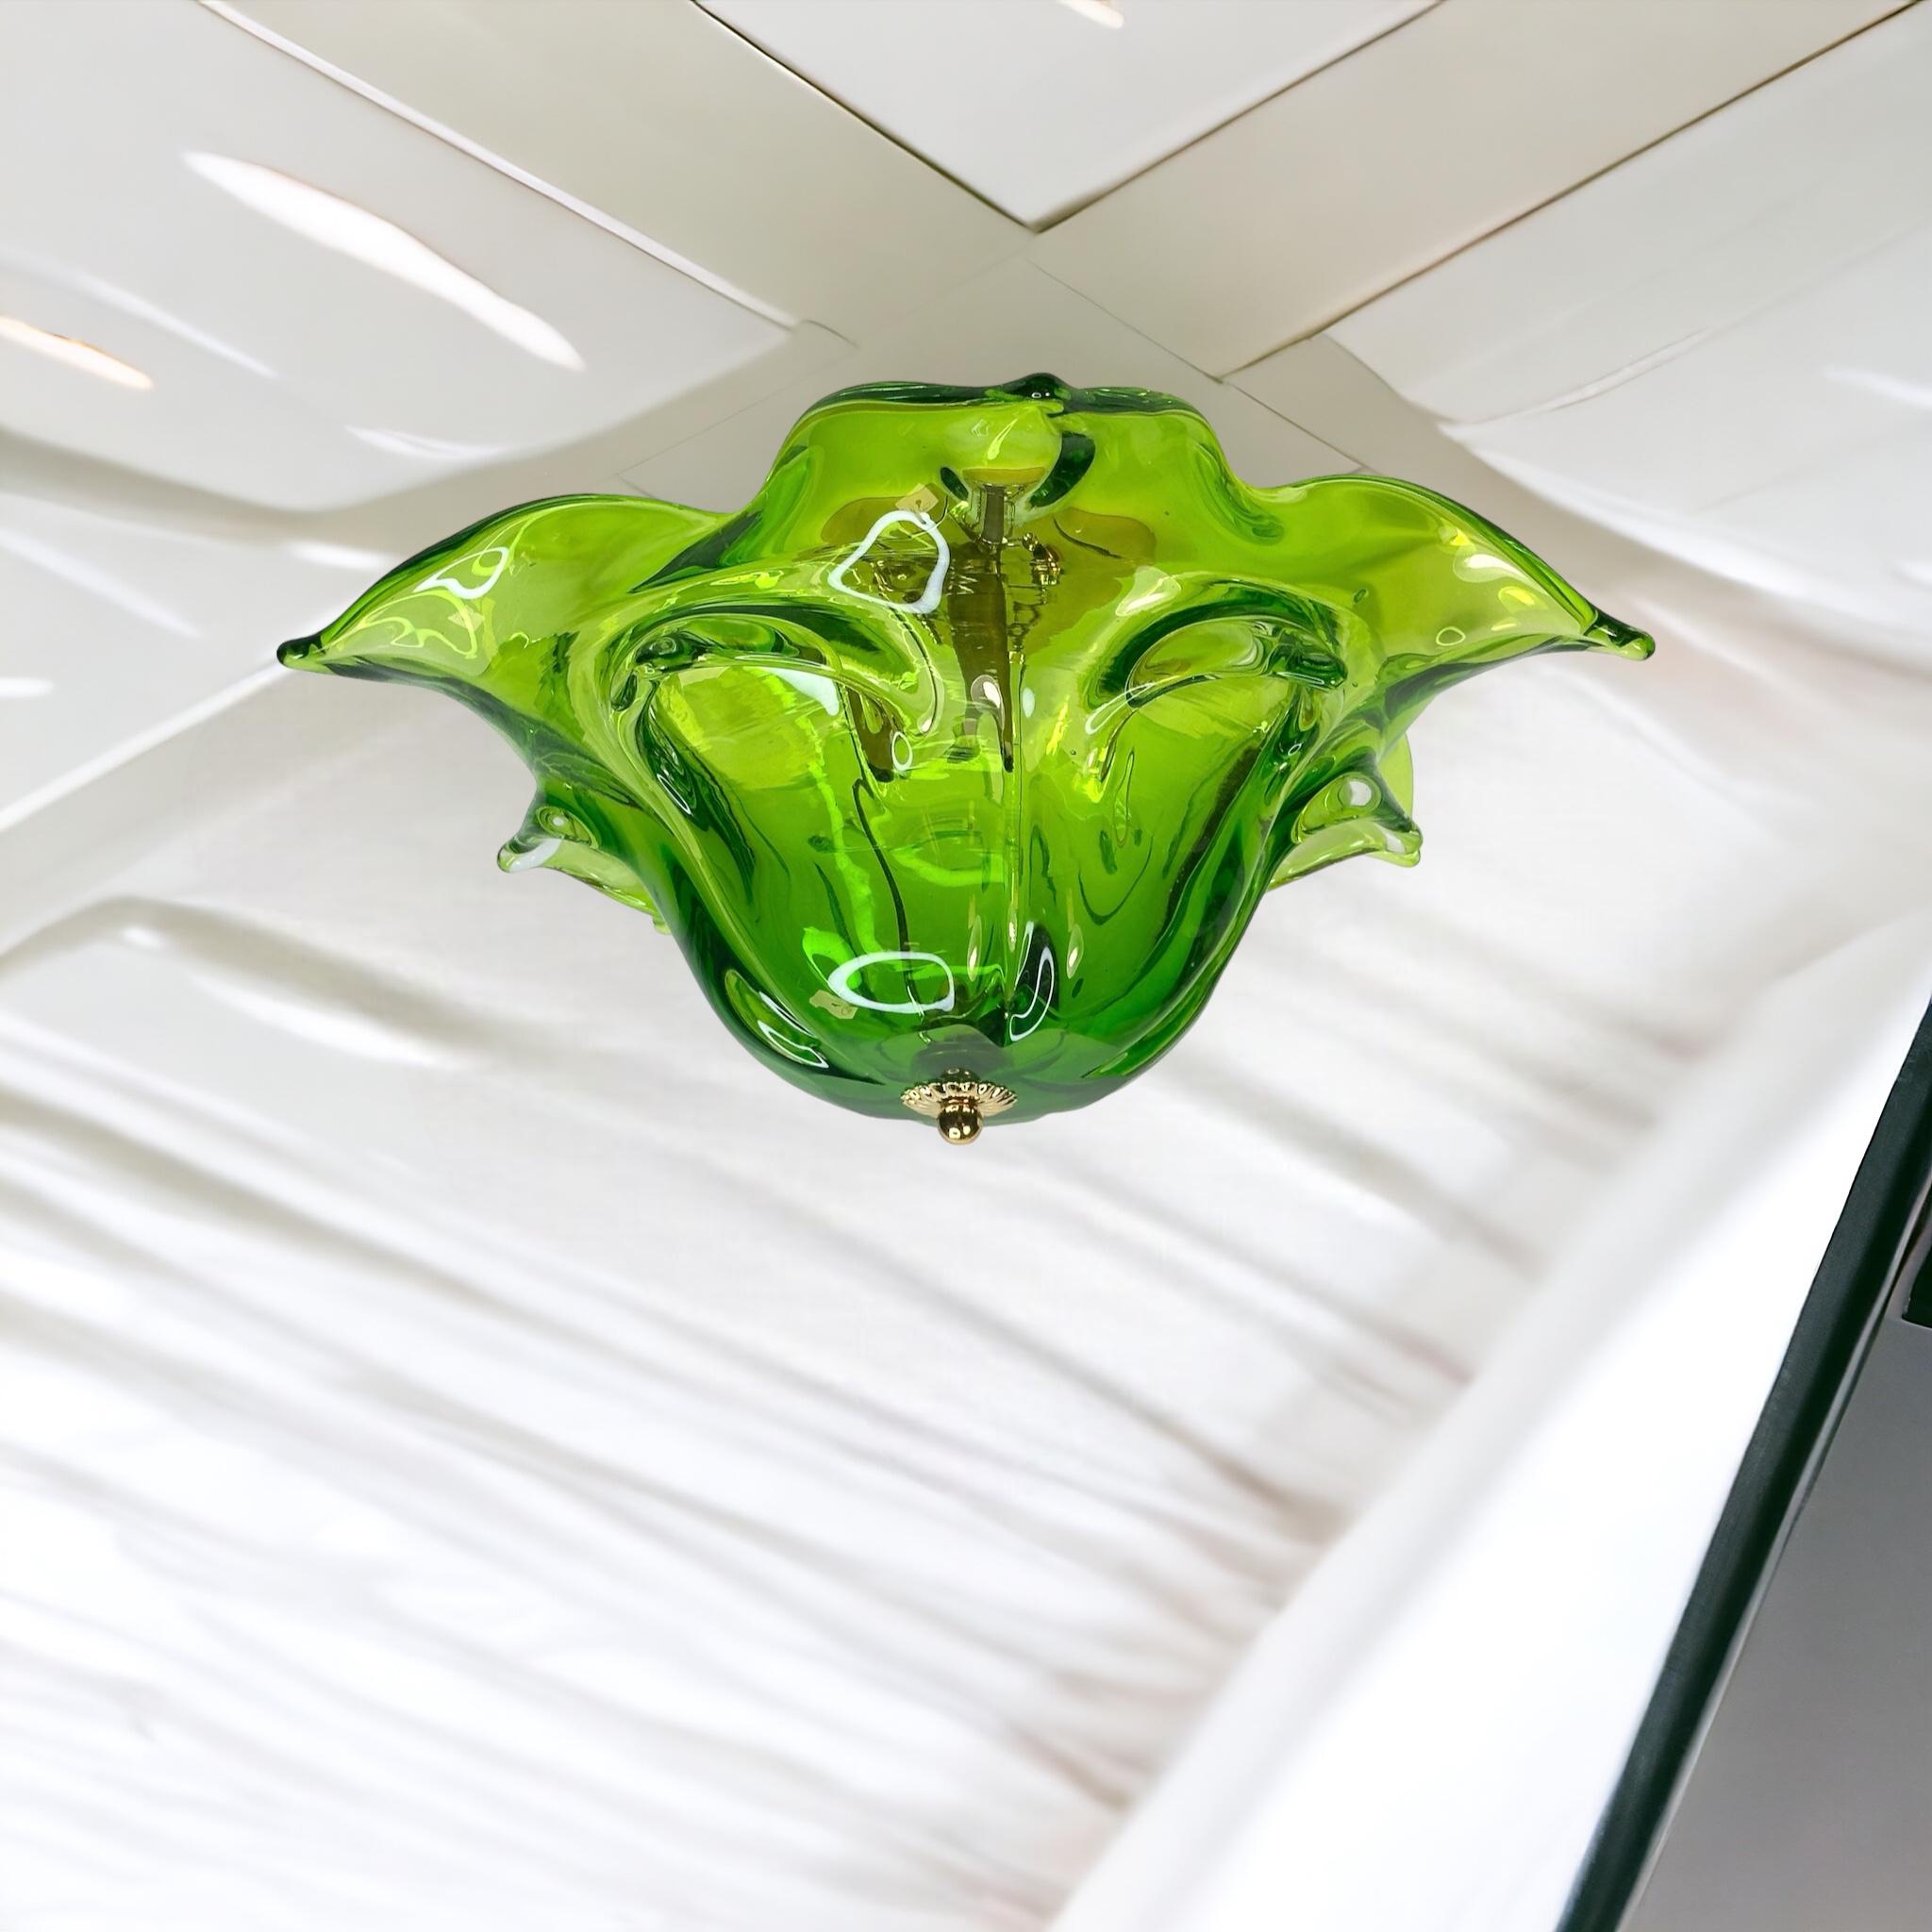 A gorgeous futuristic glass flush mount by a Murano glass company. Heavy mouth blown art glass in an organic technic. The Fixture requires an European E14 / 110 Volt Candelabra bulb, bulb up to 60 watts. Green and clear Murano glass, mounted on a